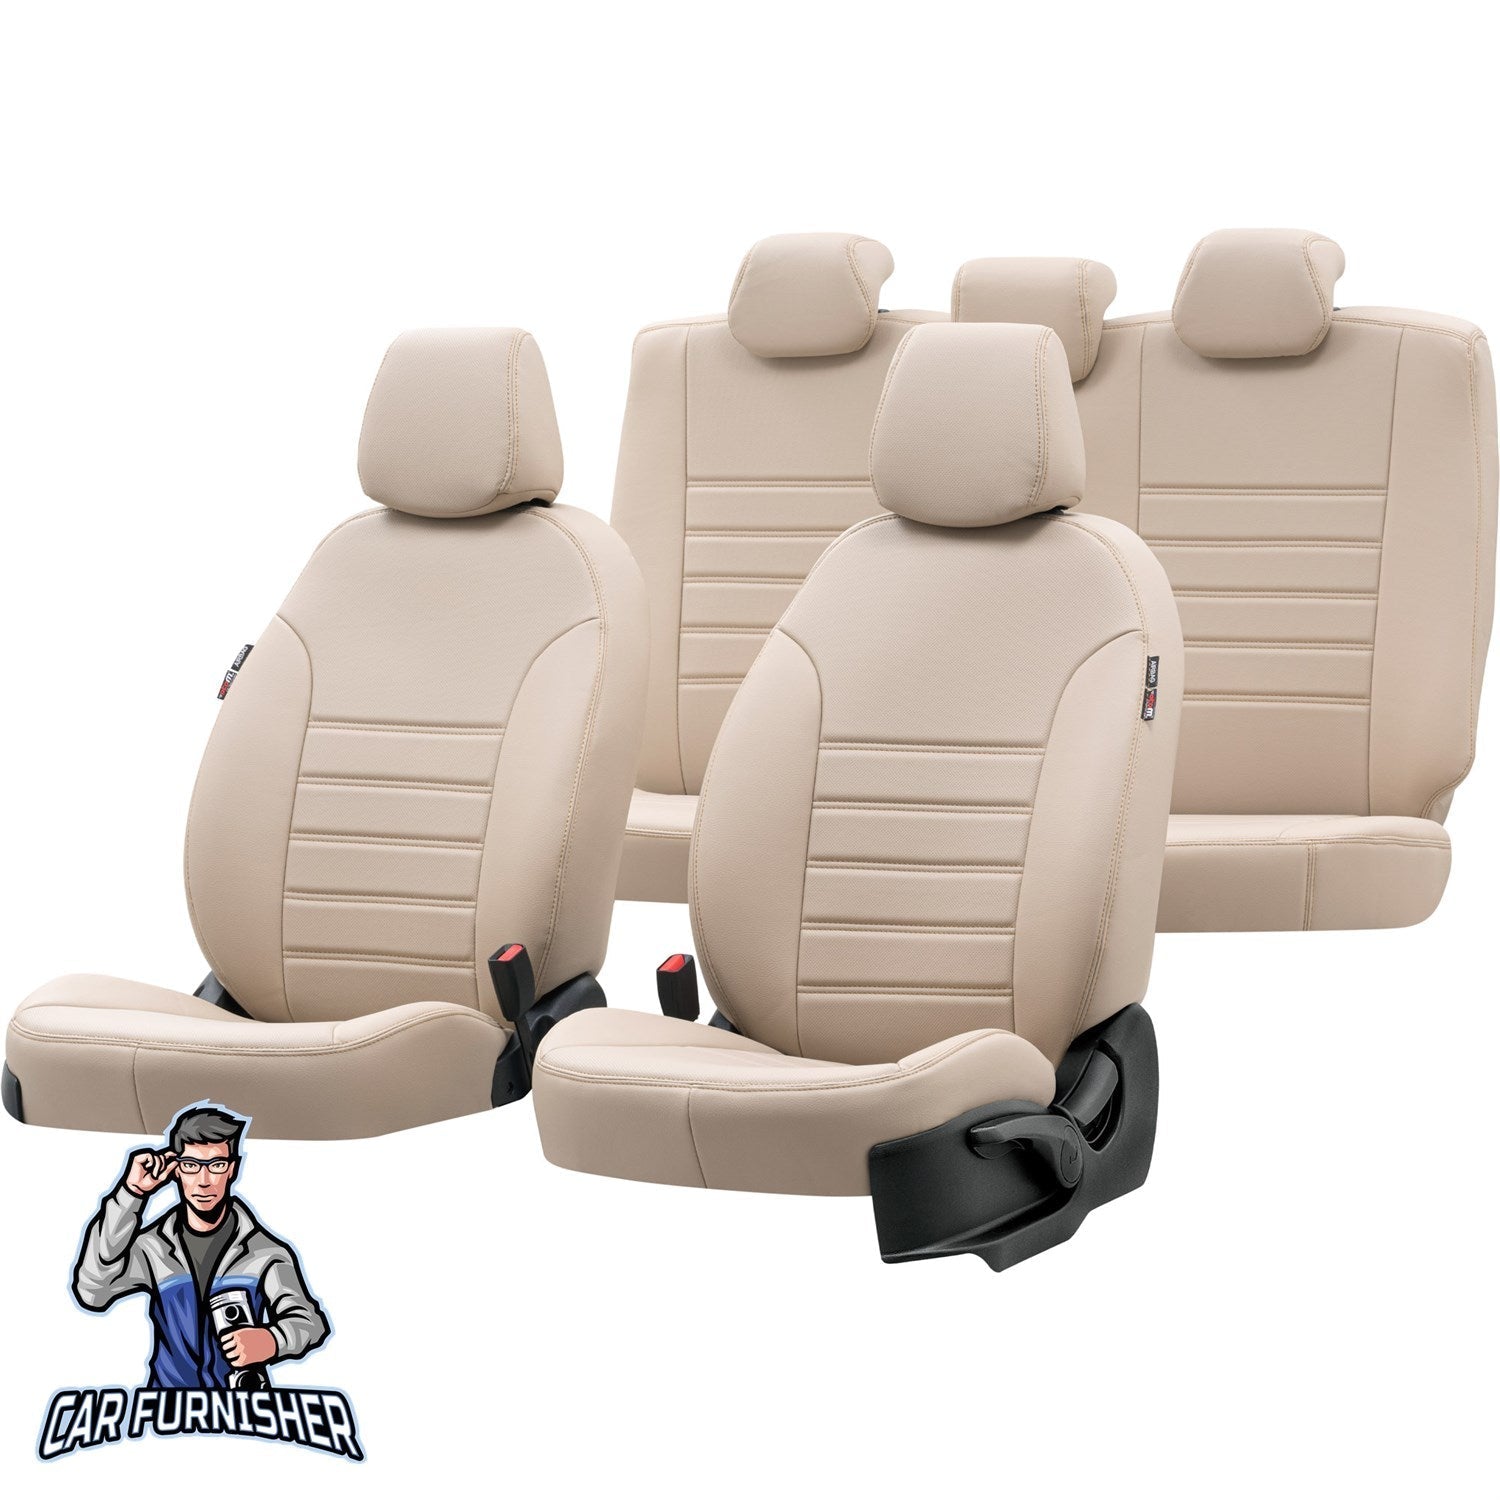 Dfm Succe Seat Covers Istanbul Leather Design Beige Leather